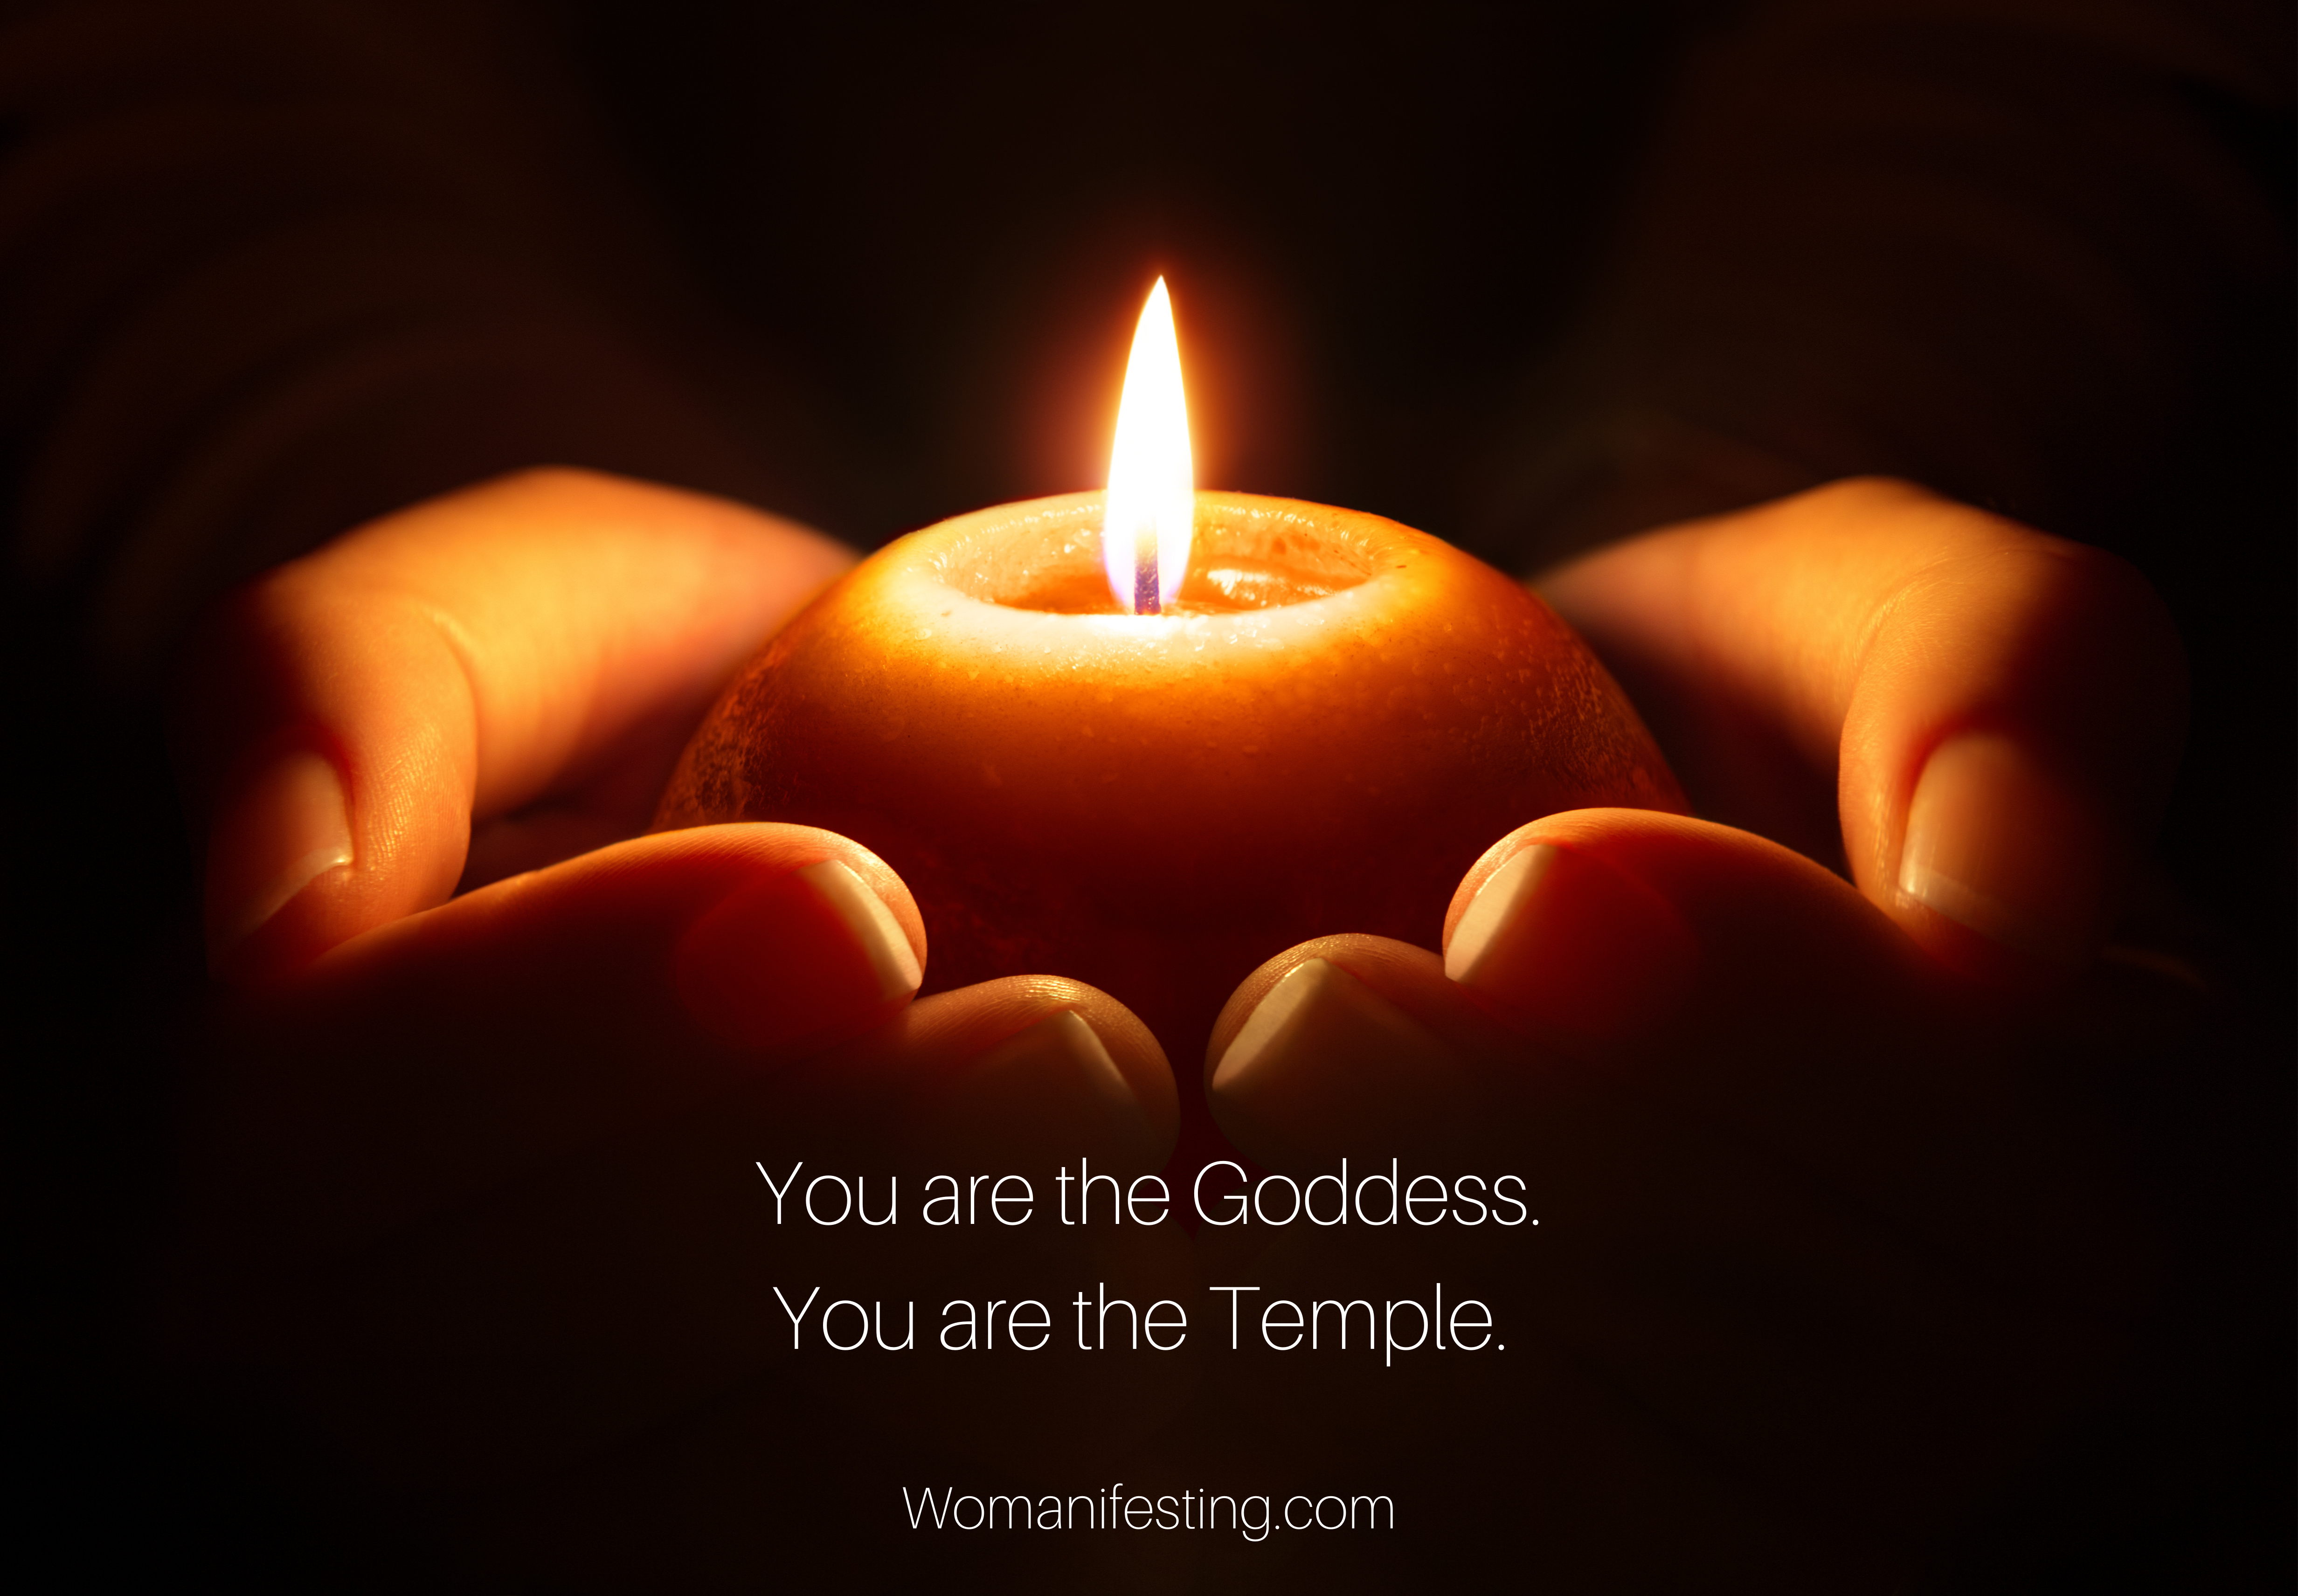 You are the Goddess. You are the Temple.